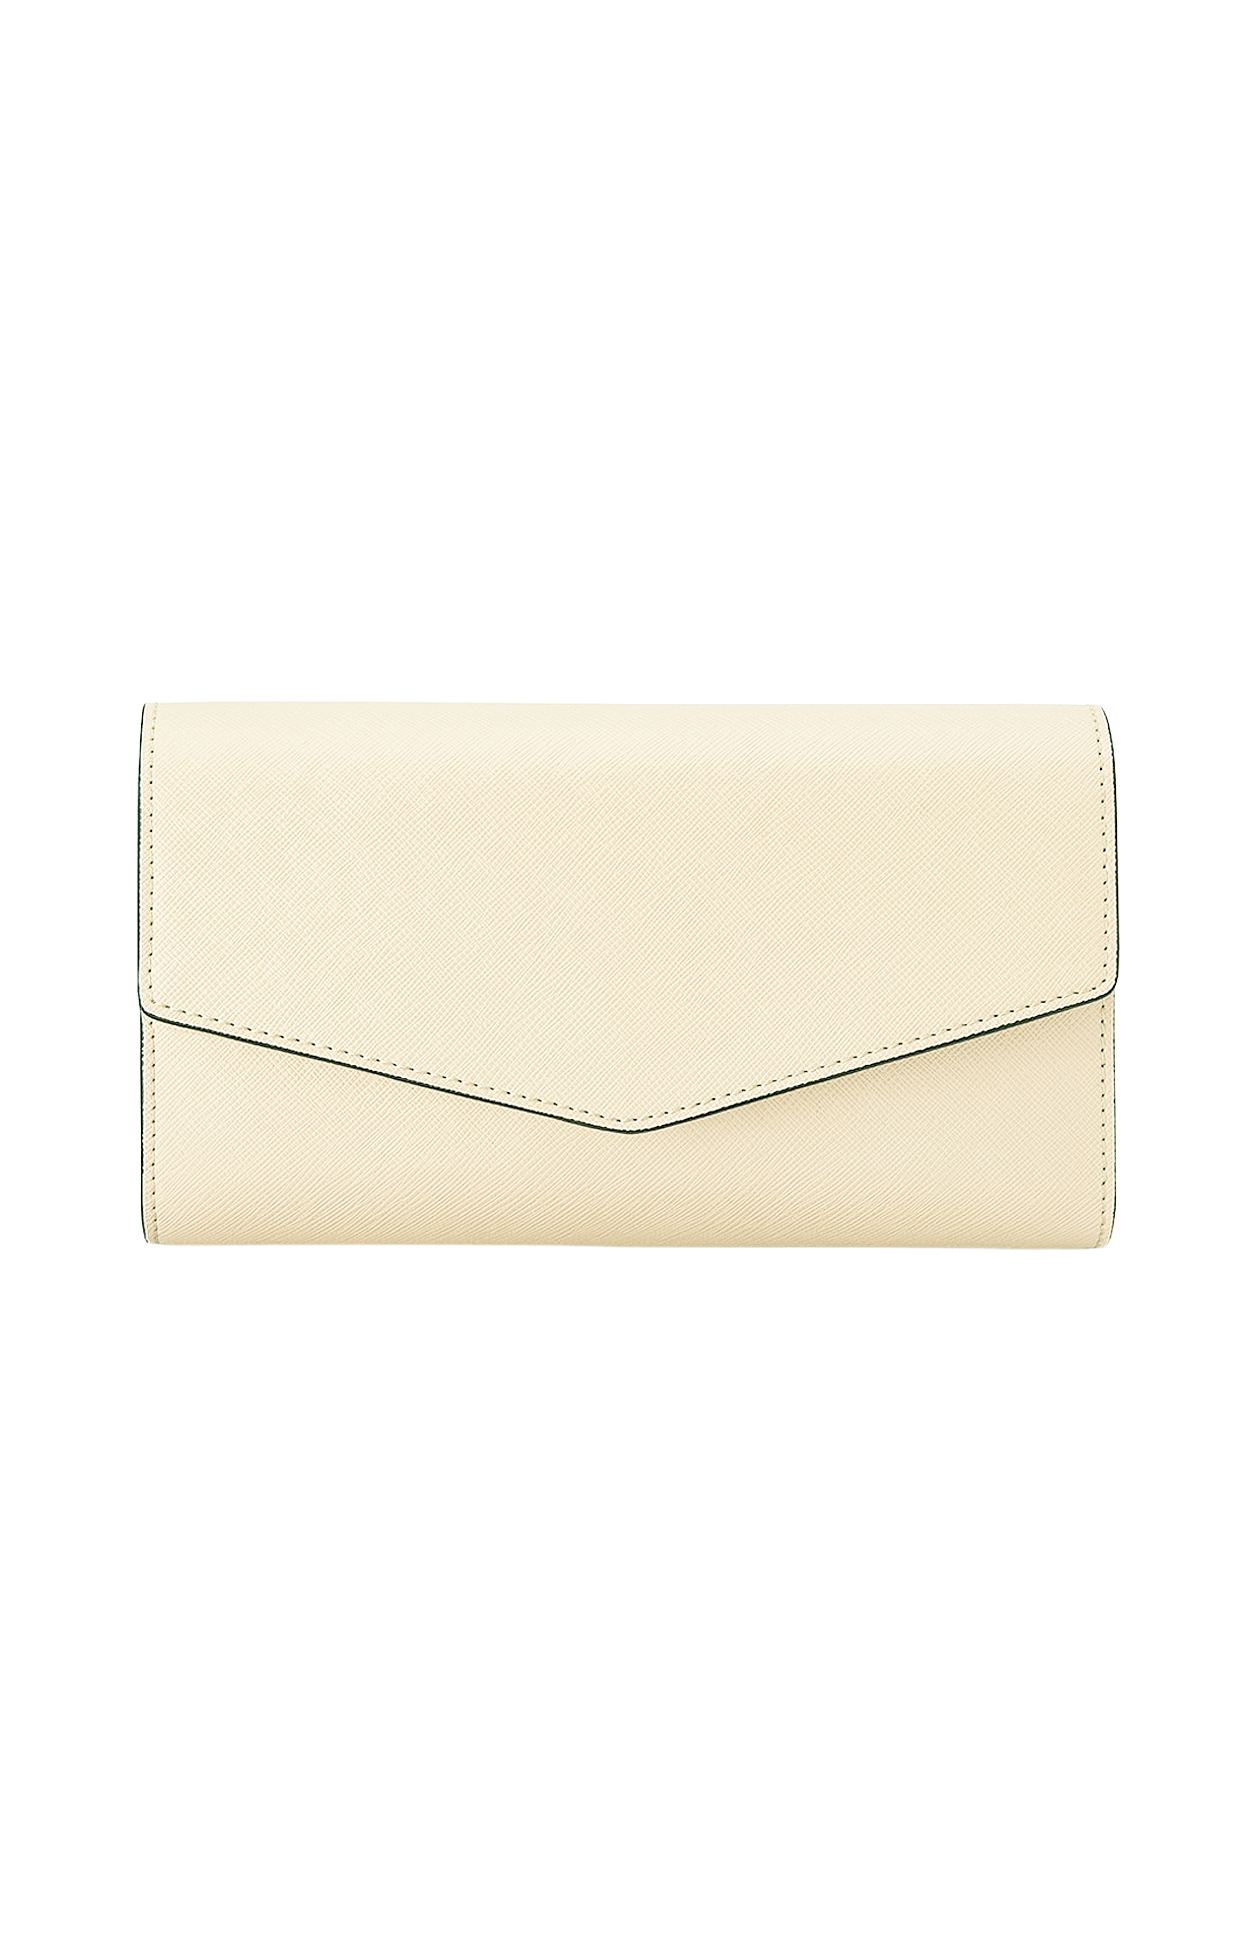 ACCESSORIES Bags Clutches One Size / Neutral NIC ENVELOPE CLUTCH IN NATURAL